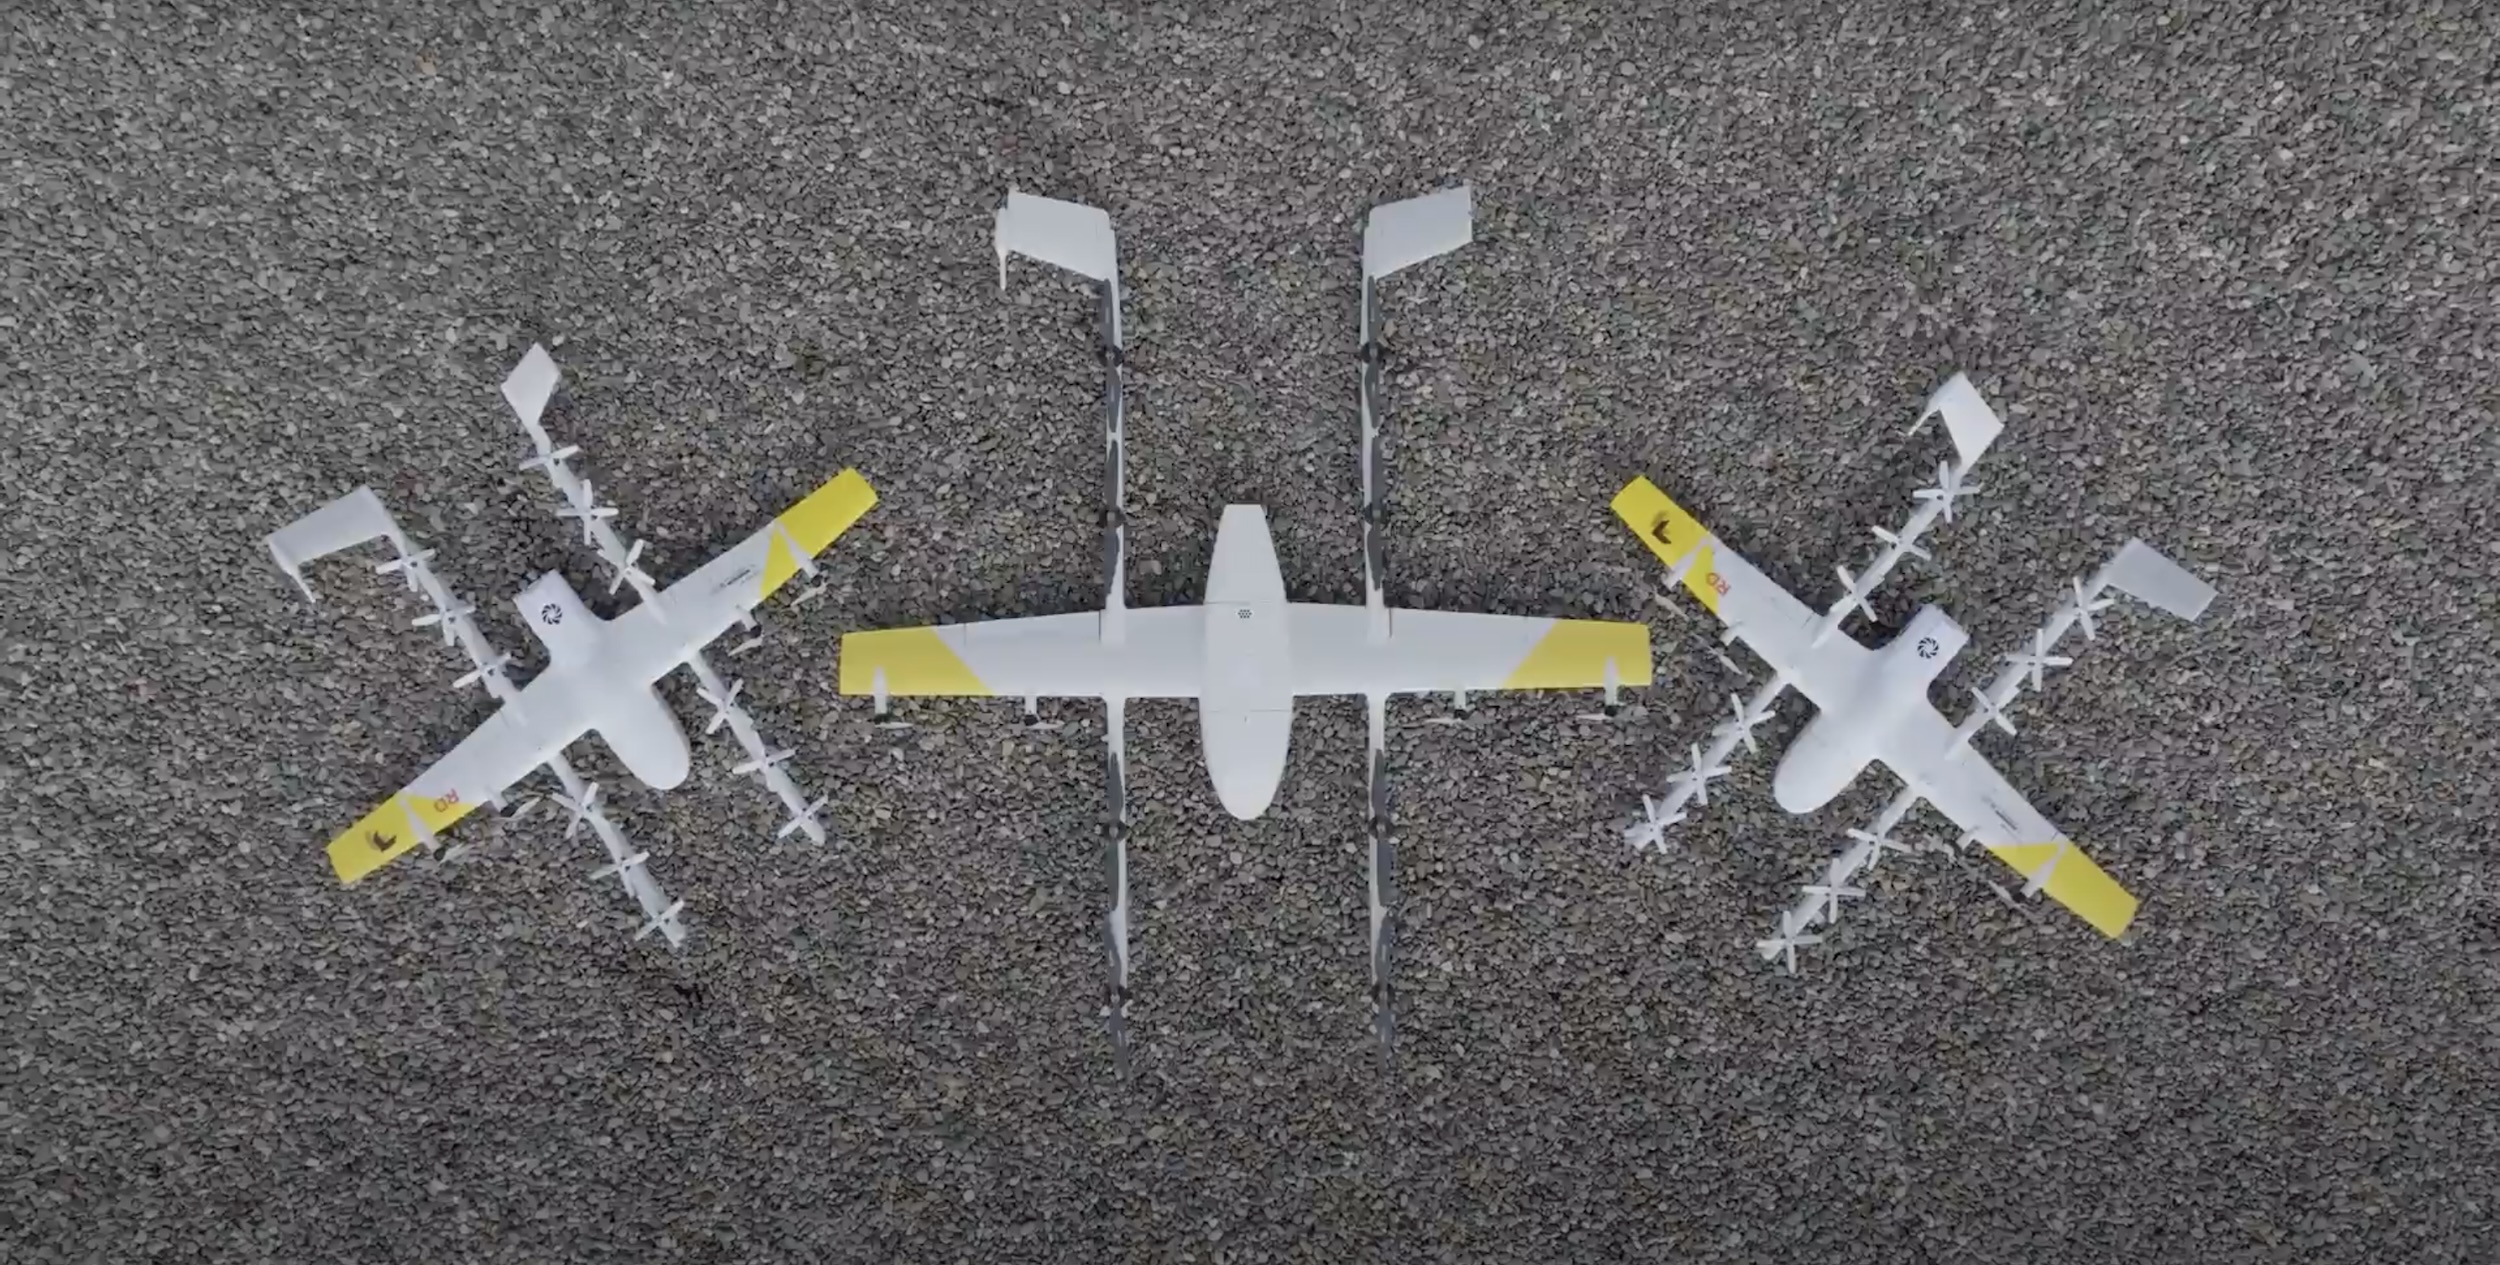 A close-up of Wing's delivery drones, screenshot from a promotional video by Alphabet.